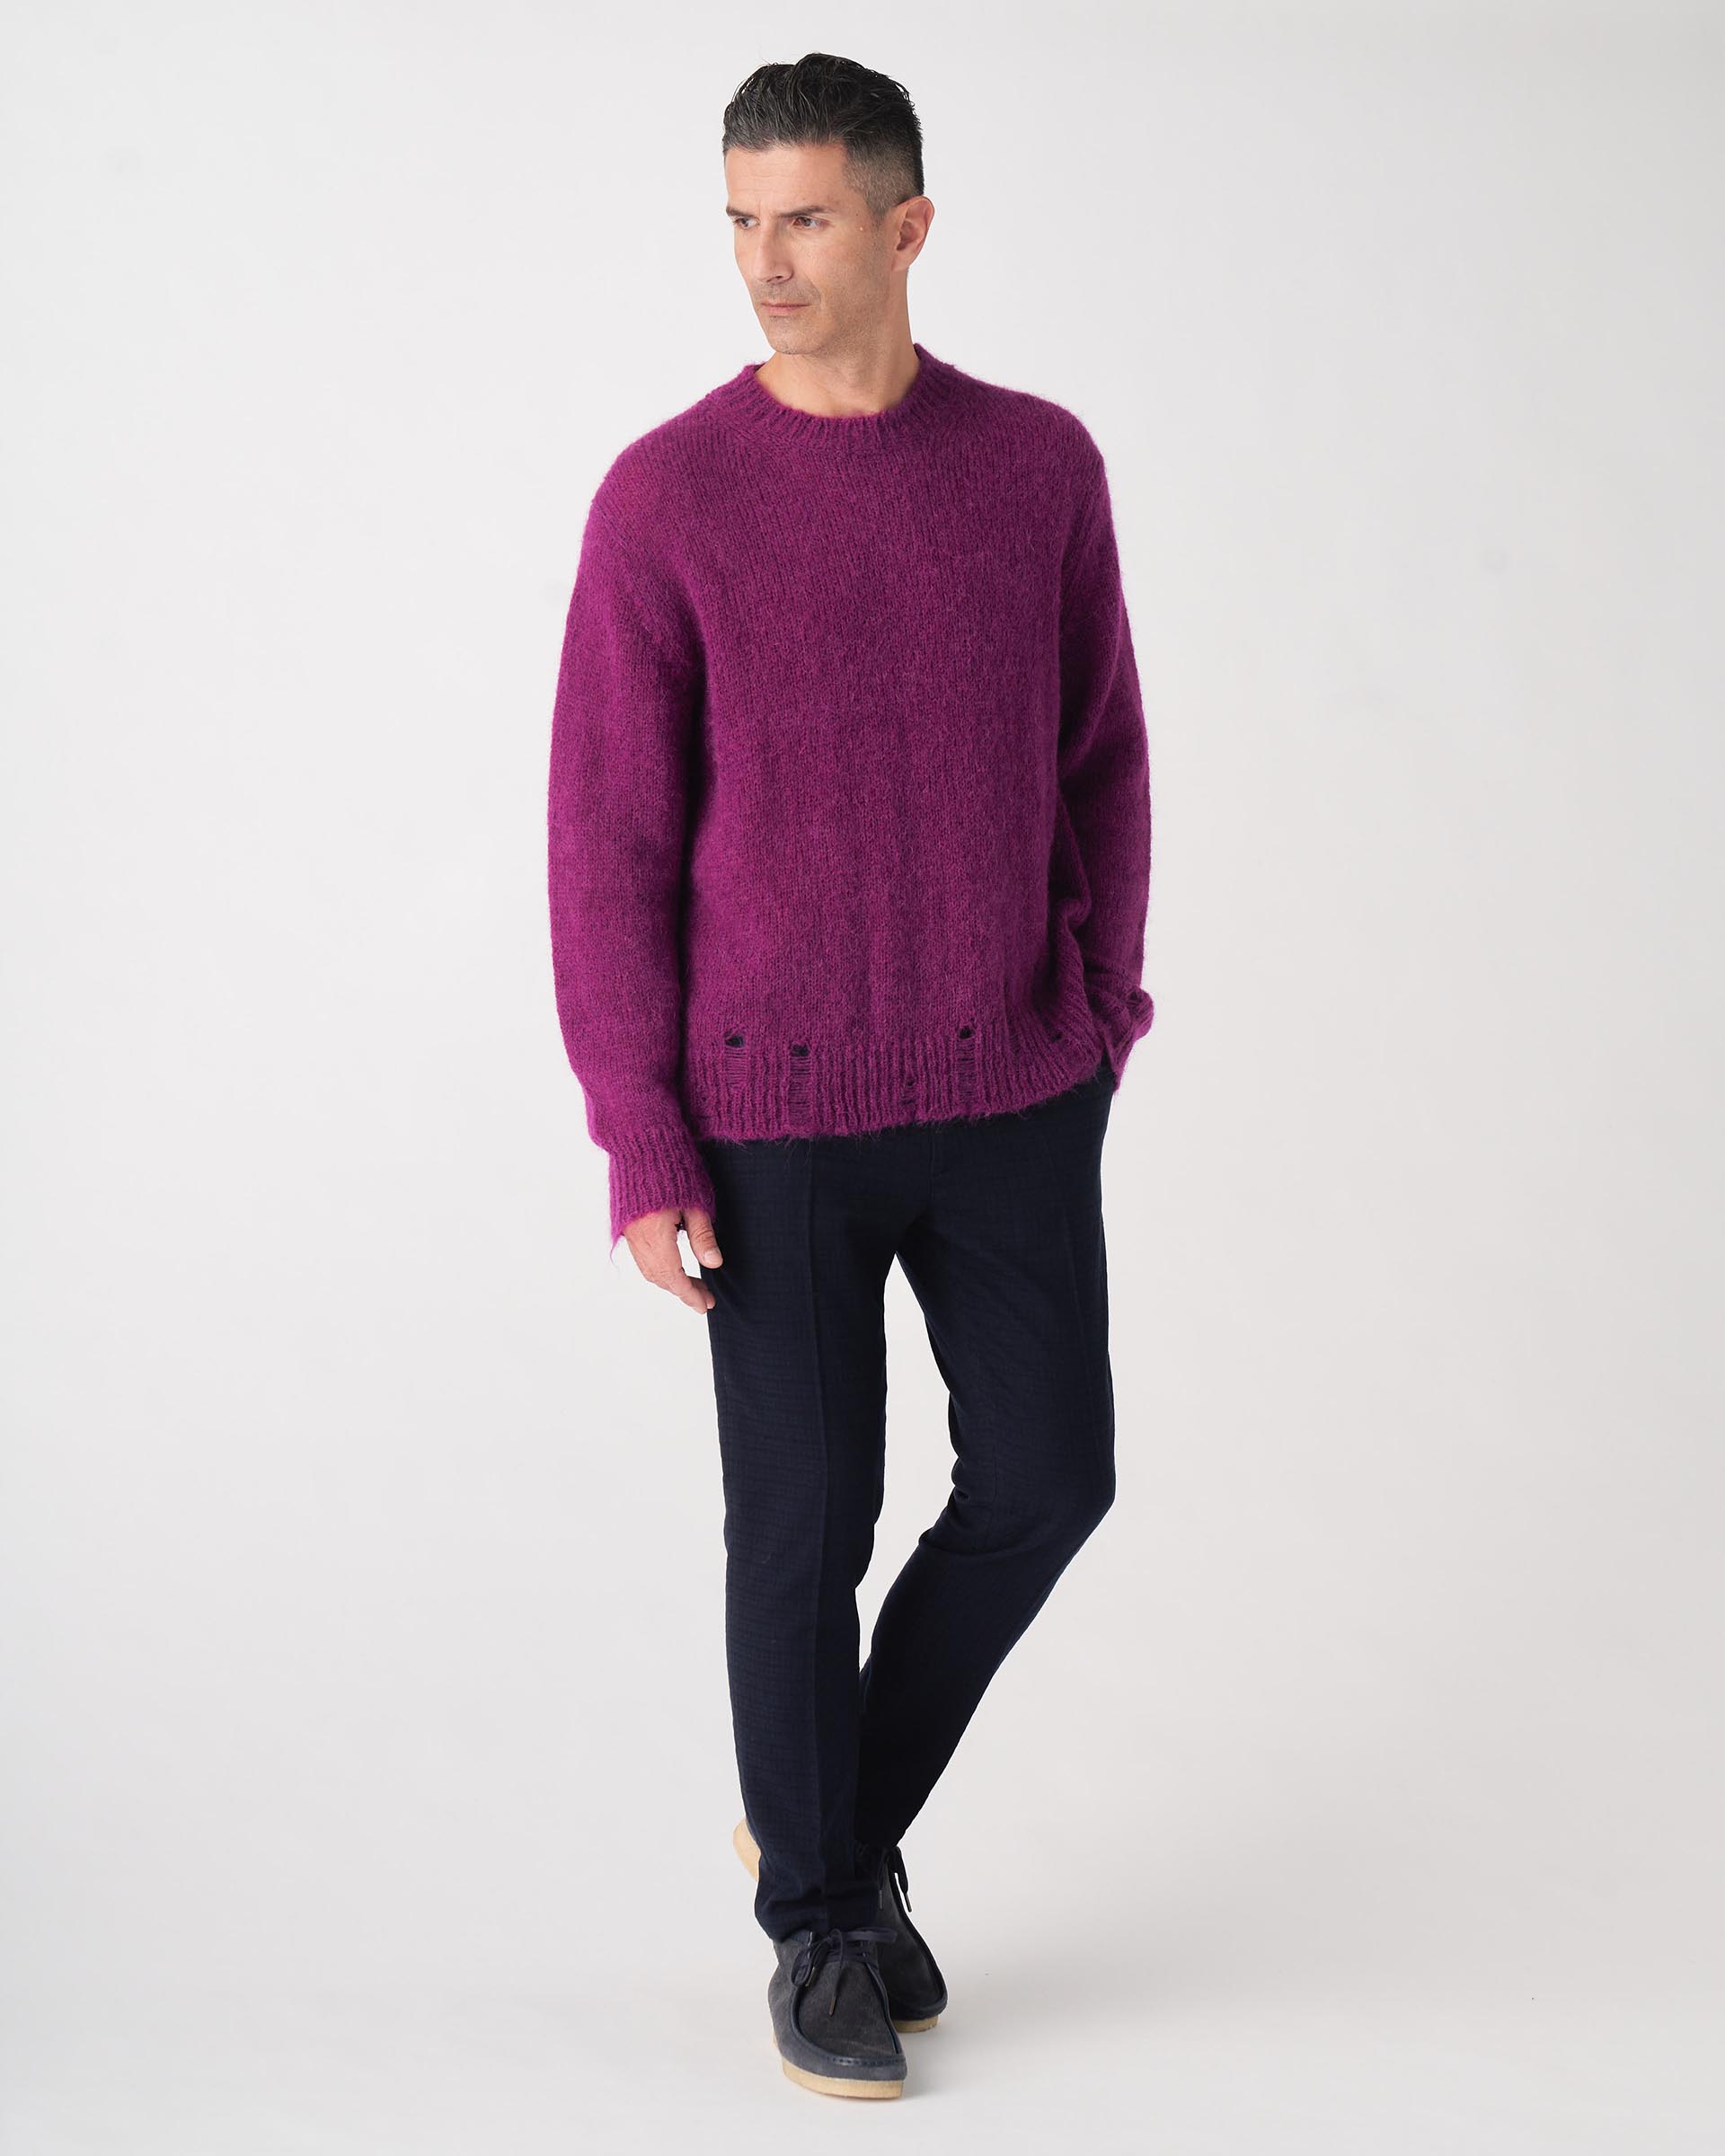 The Market Store | Round Neck Sweater With Breaks